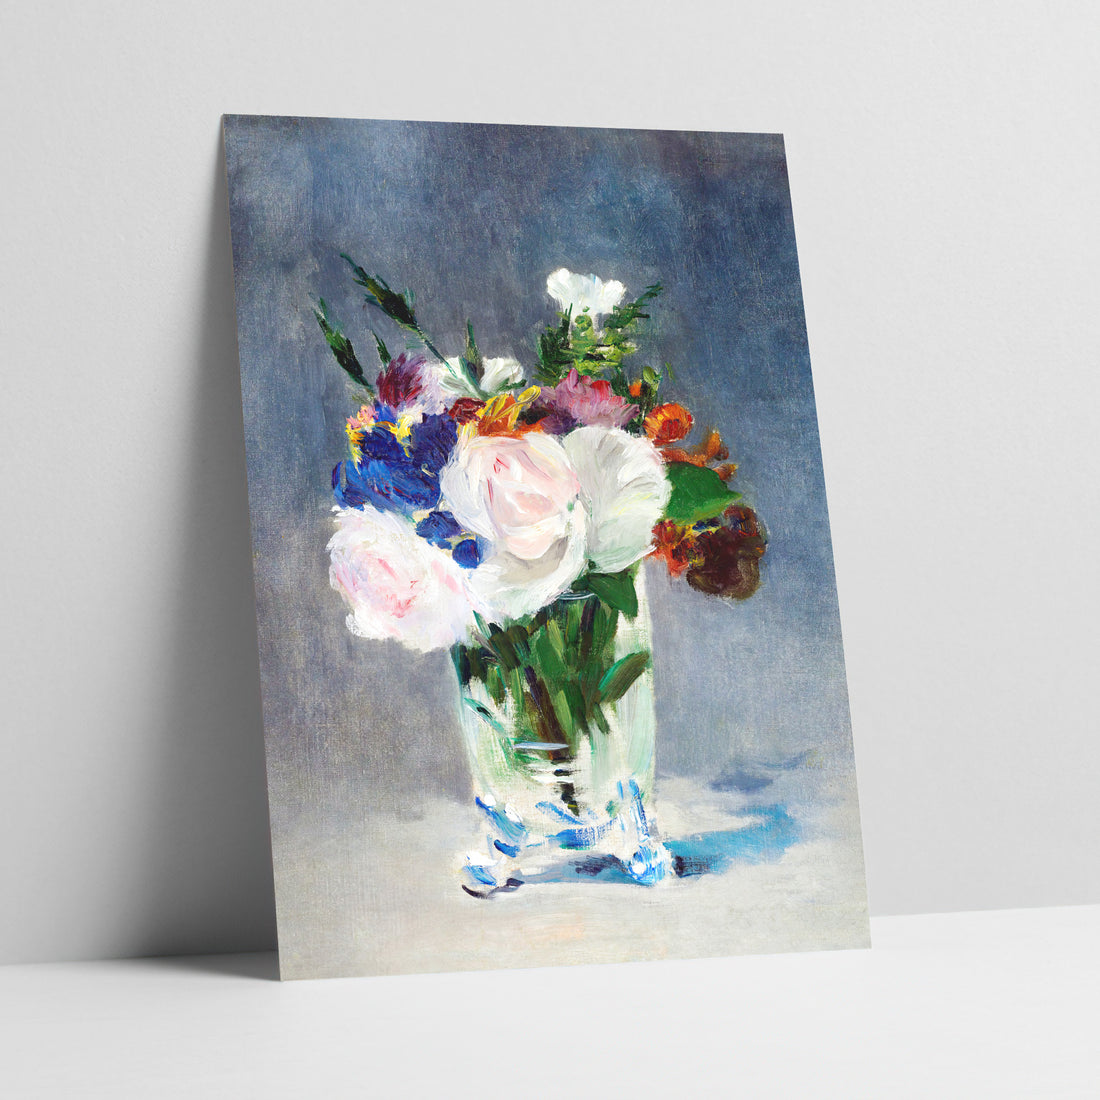 Flowers in a Crystal Vase by Edouard Manet Art Print